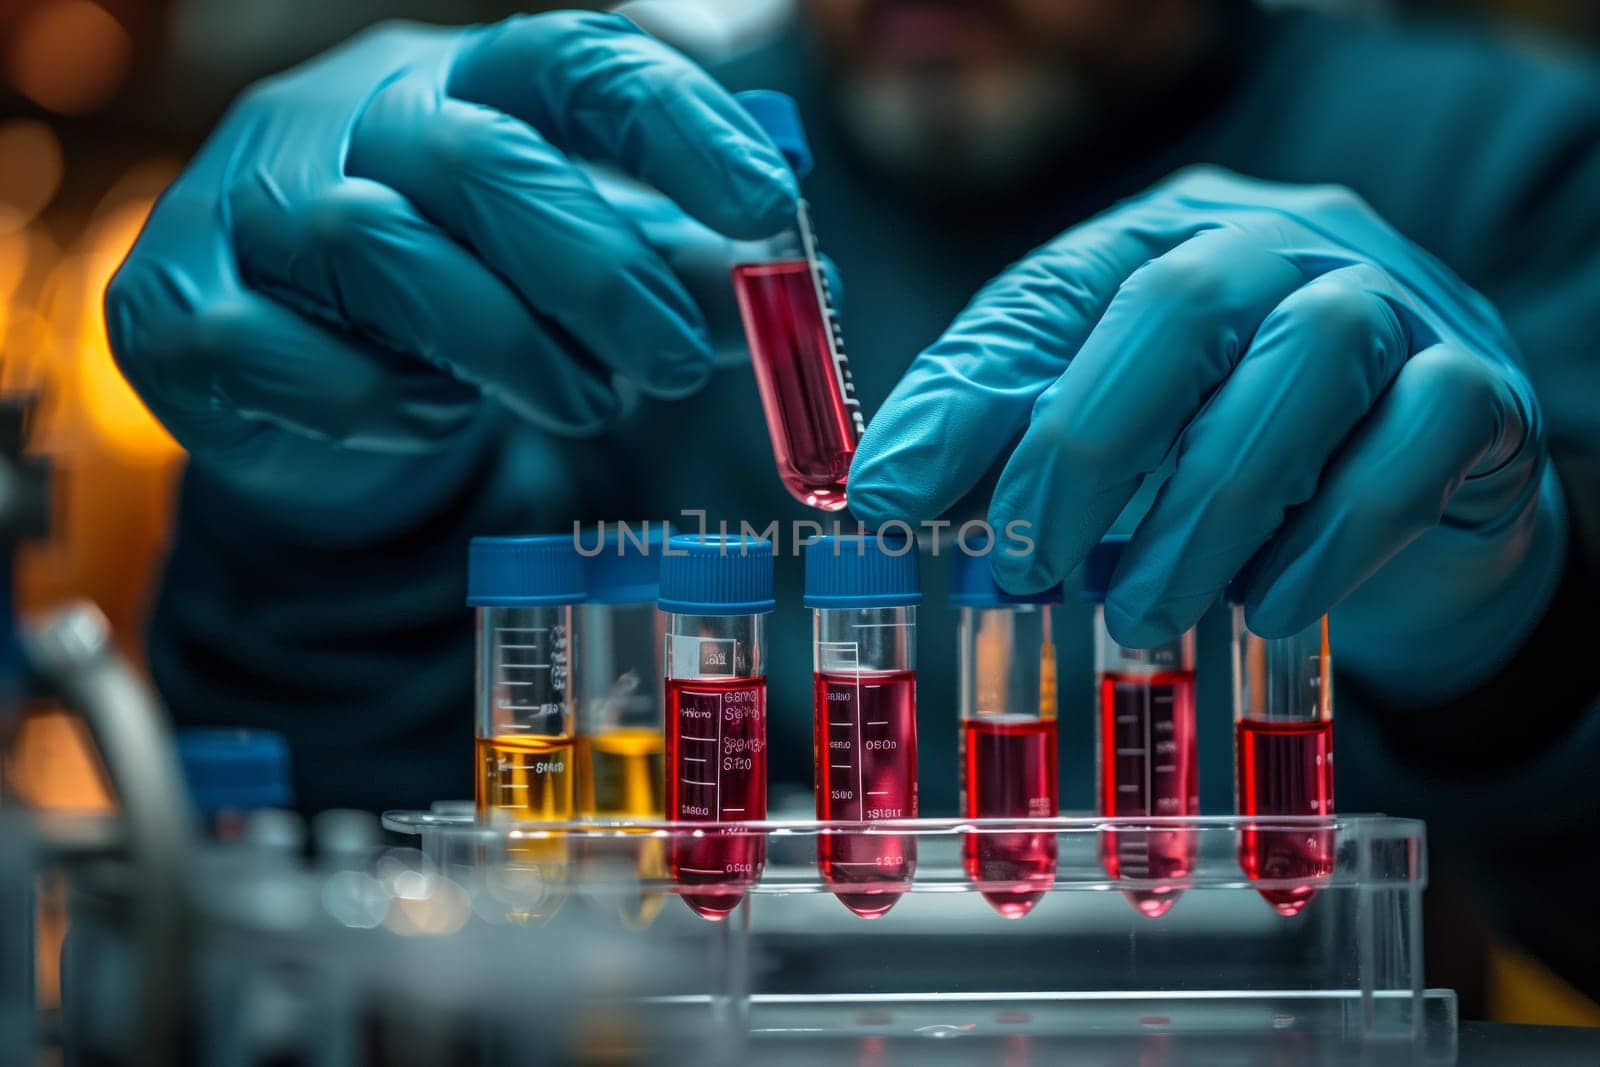 A scientist is carefully pouring a red fluid into a test tube using a laboratory equipment. Their thumb and finger grip the tube while they focus on the experiment